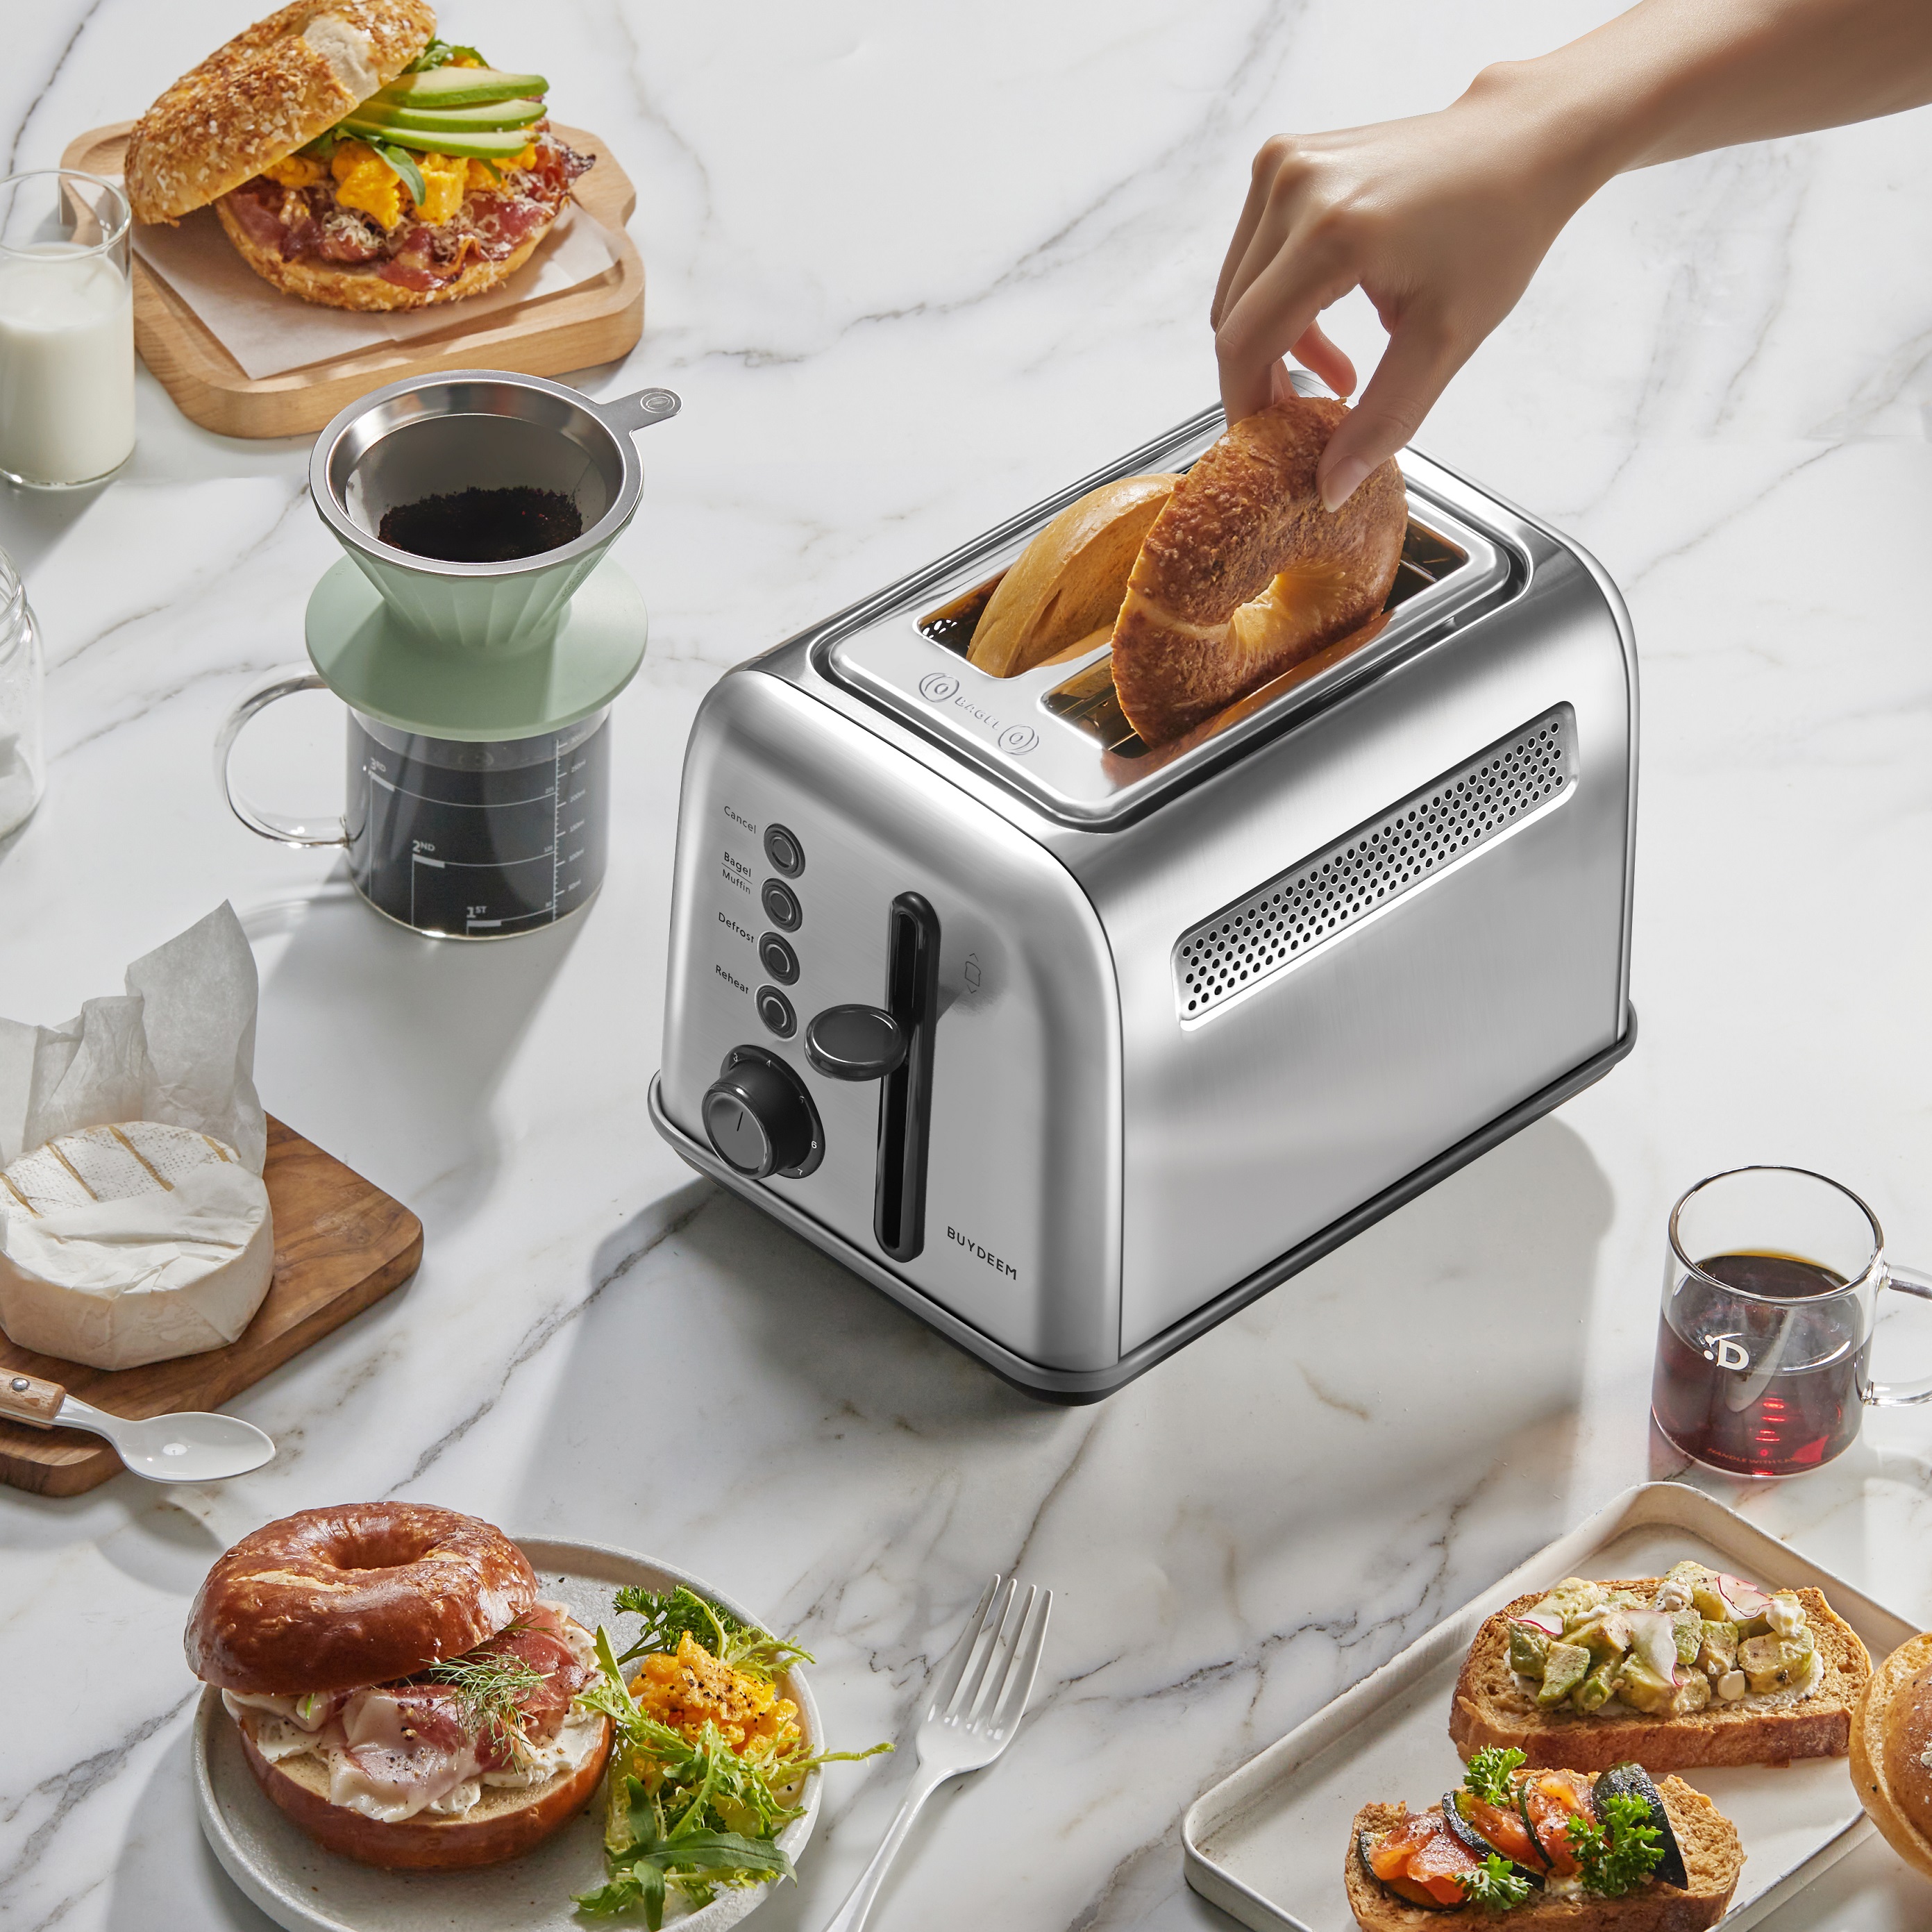 Toaster 2 Slice Best Rated Prime Stainless Steel 2 Slice Toasters Extra  Wide Slot Toasters 7 Shade Settings Defrost/Bagel/Cancel - AliExpress